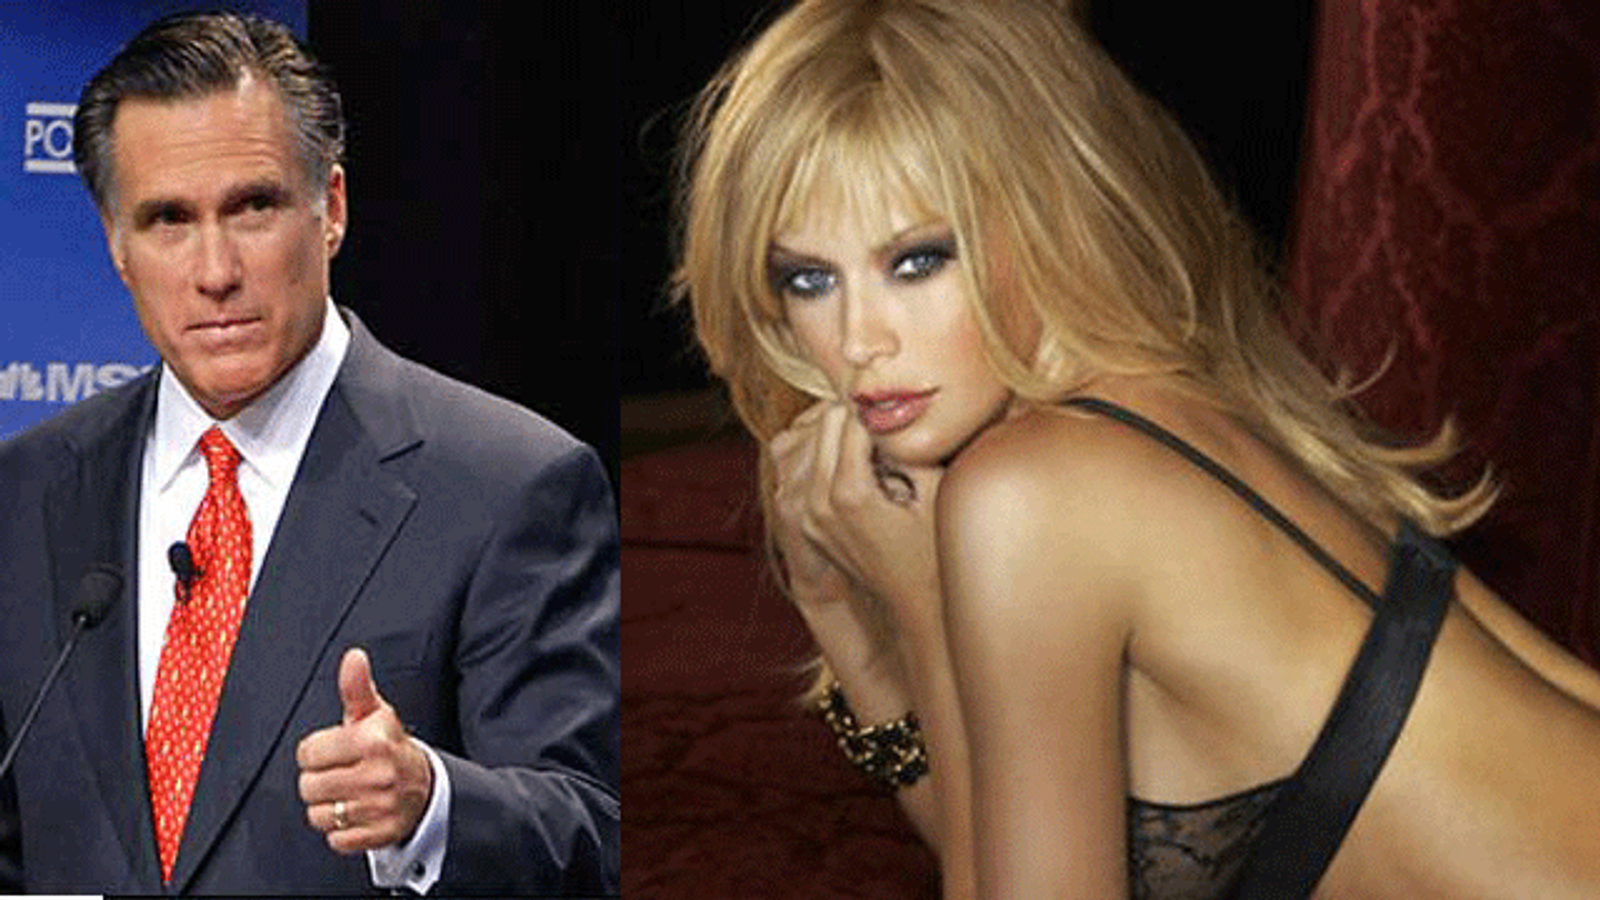 Jenna Jameson Comes Out in Favor of Romney